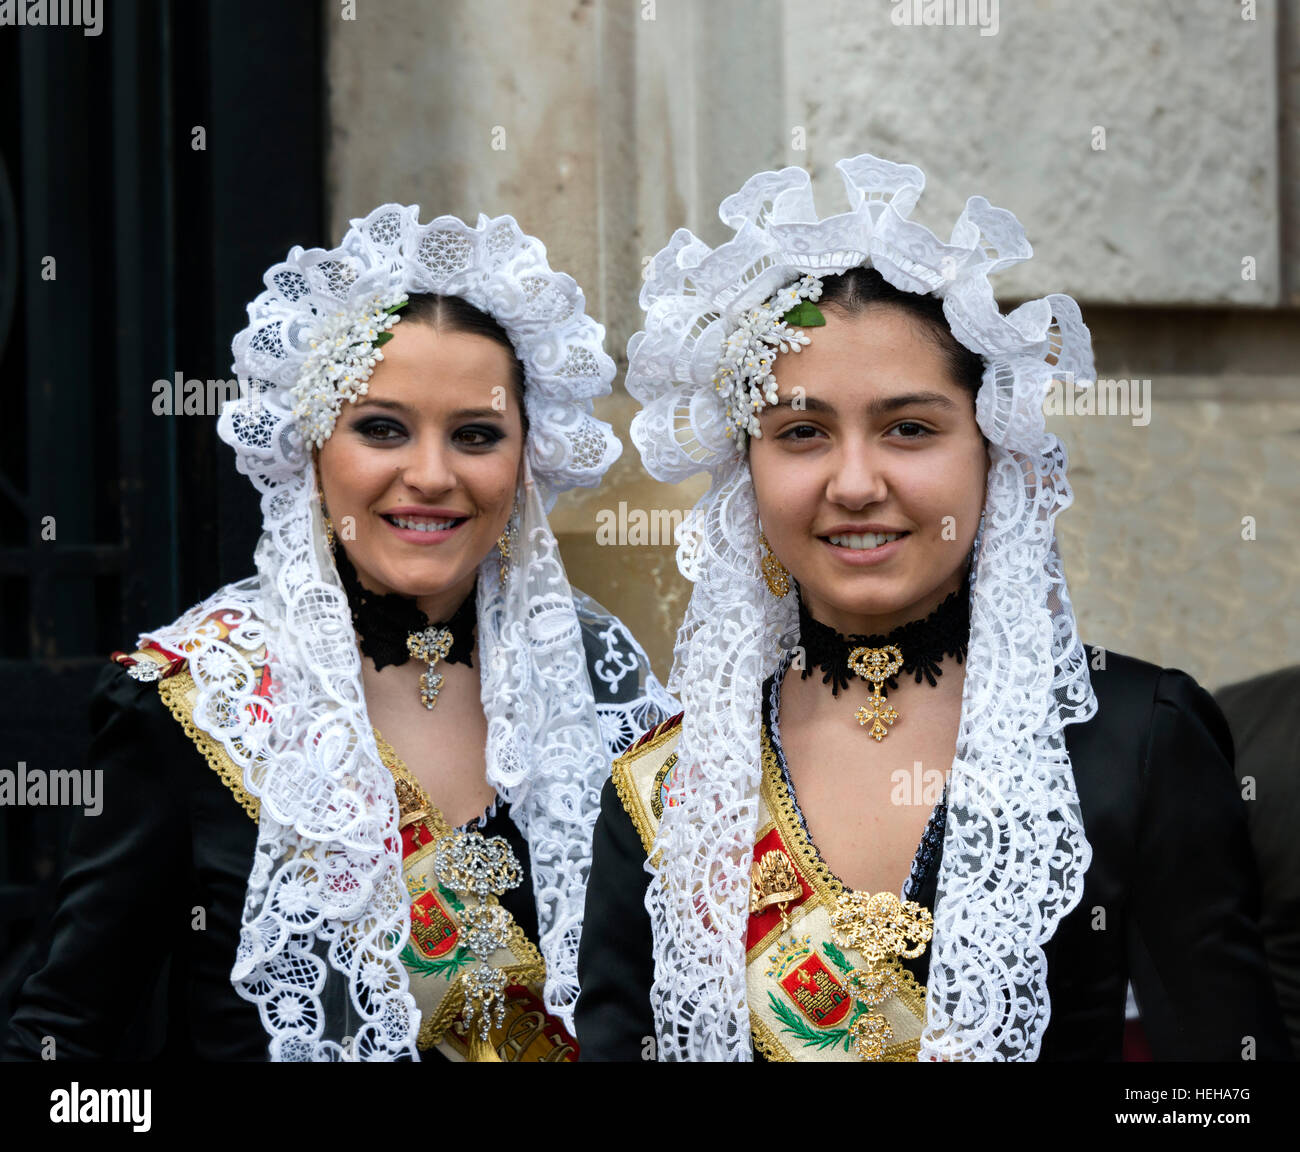 Spanish Girls  in Traditional Costume including lace mantilla  veil or shawl during las Fallas or Falles festival in Valencia Spain Stock Photo